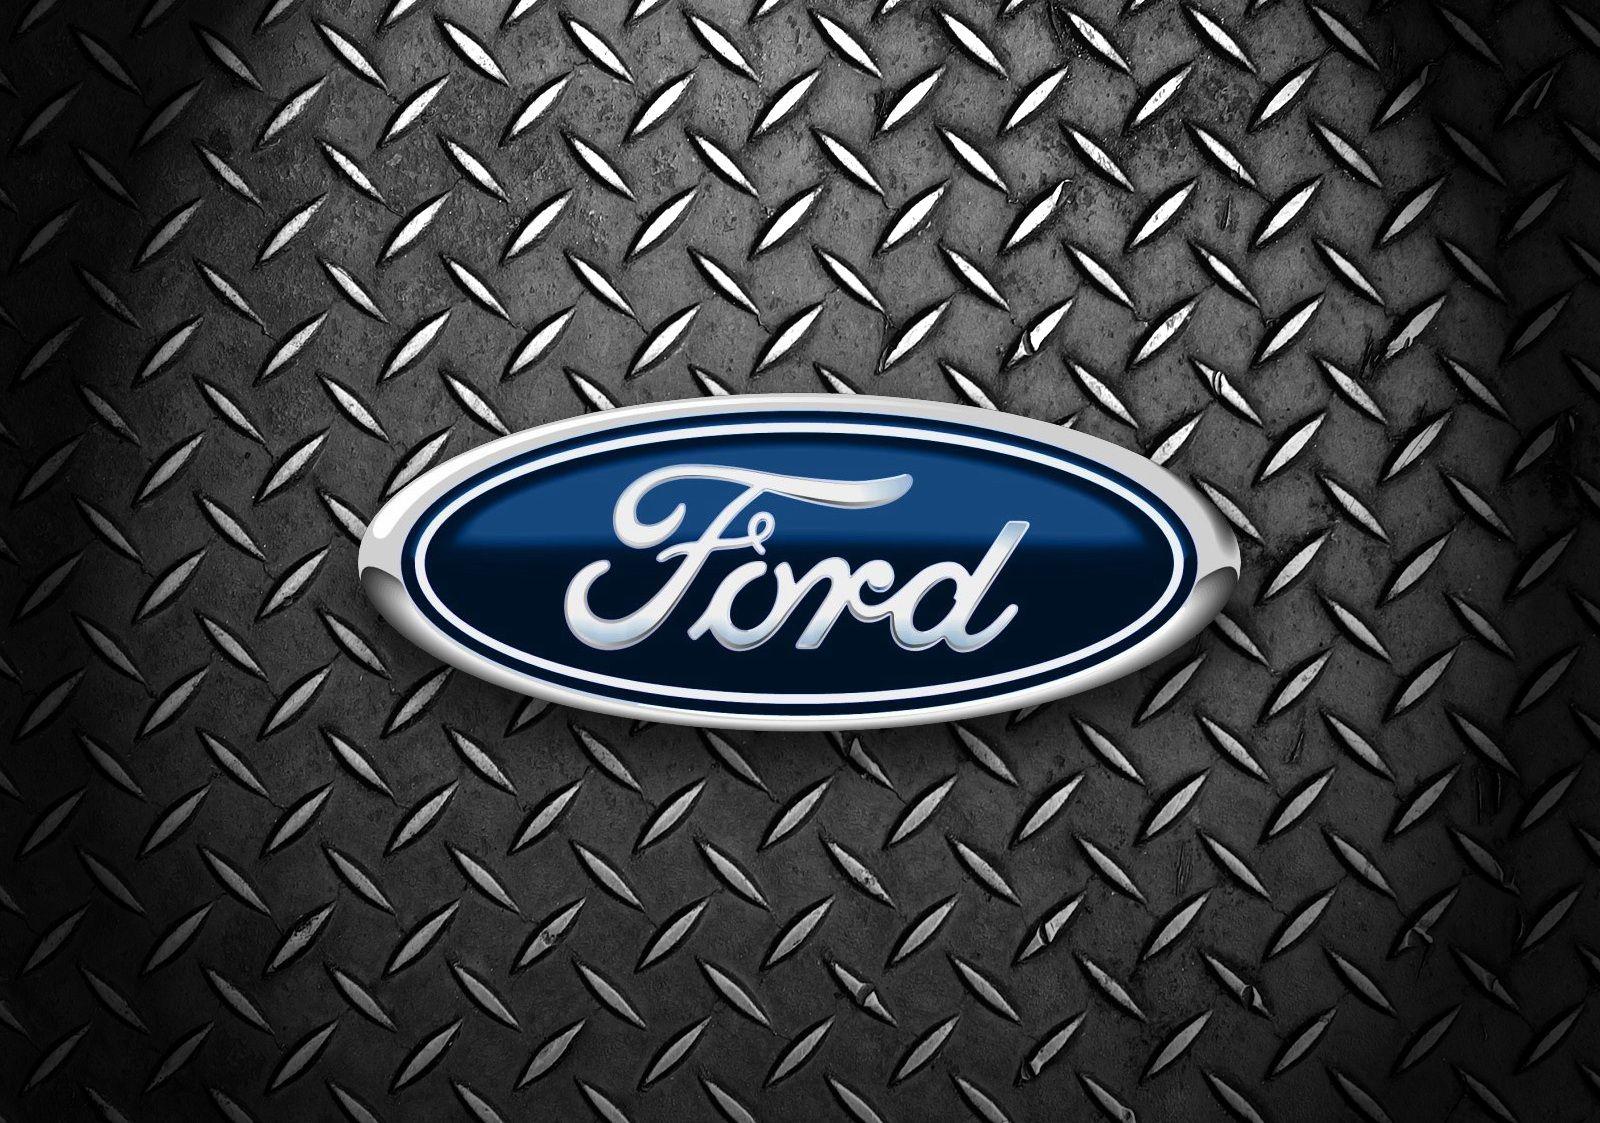 Blue Oval with Red E Logo - Ford Logo, Ford Car Symbol Meaning and History | Car Brand Names.com